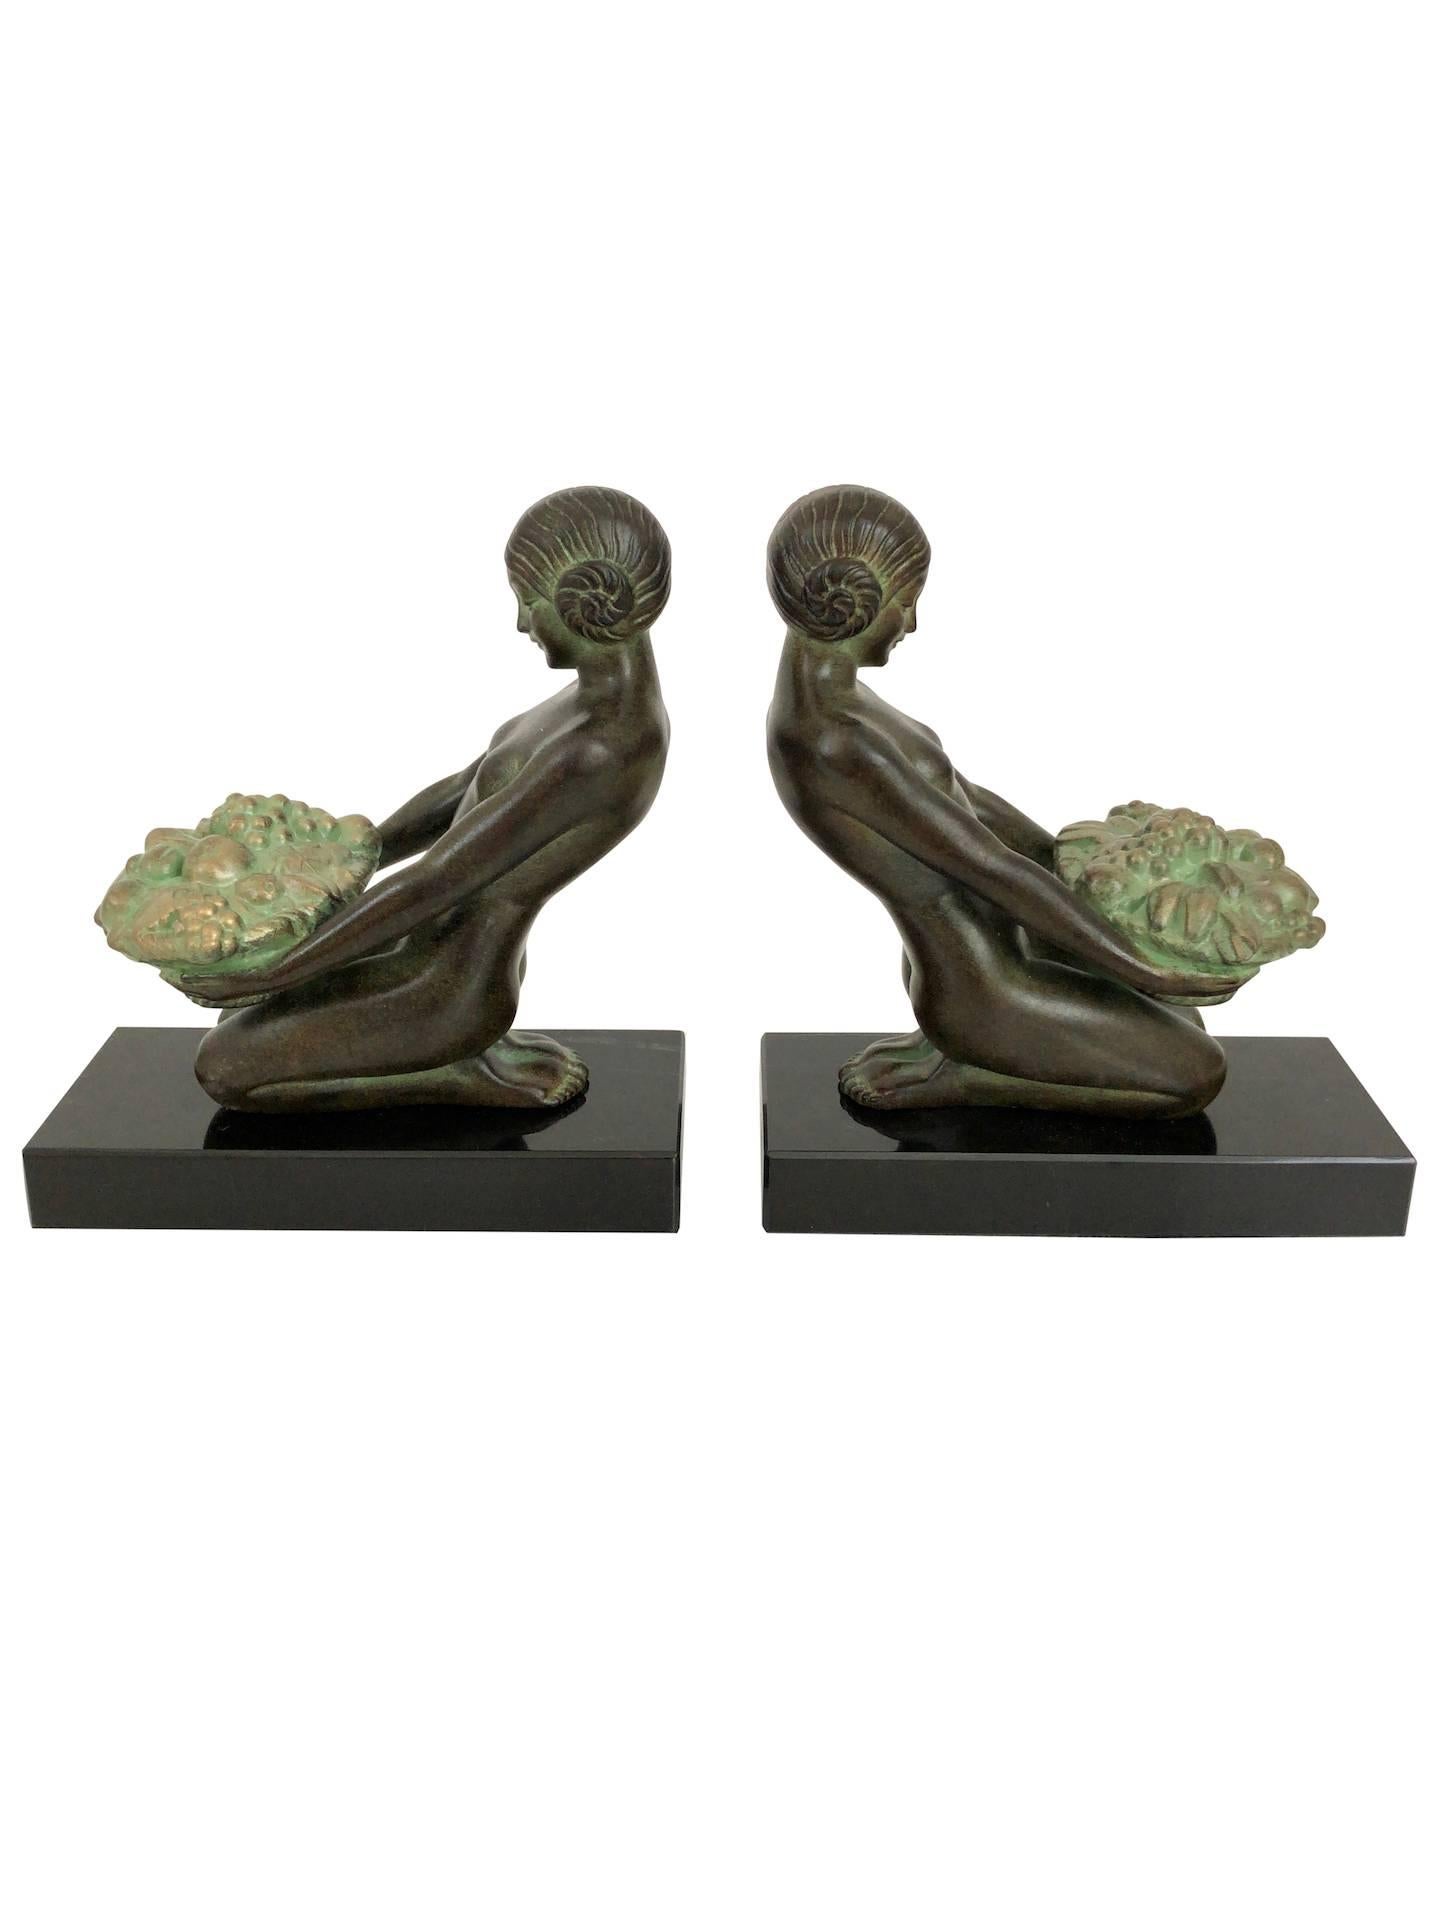 Patinated Original Max Le Verrier Cueillette Art Deco Style Bookends in Spelter and Marble